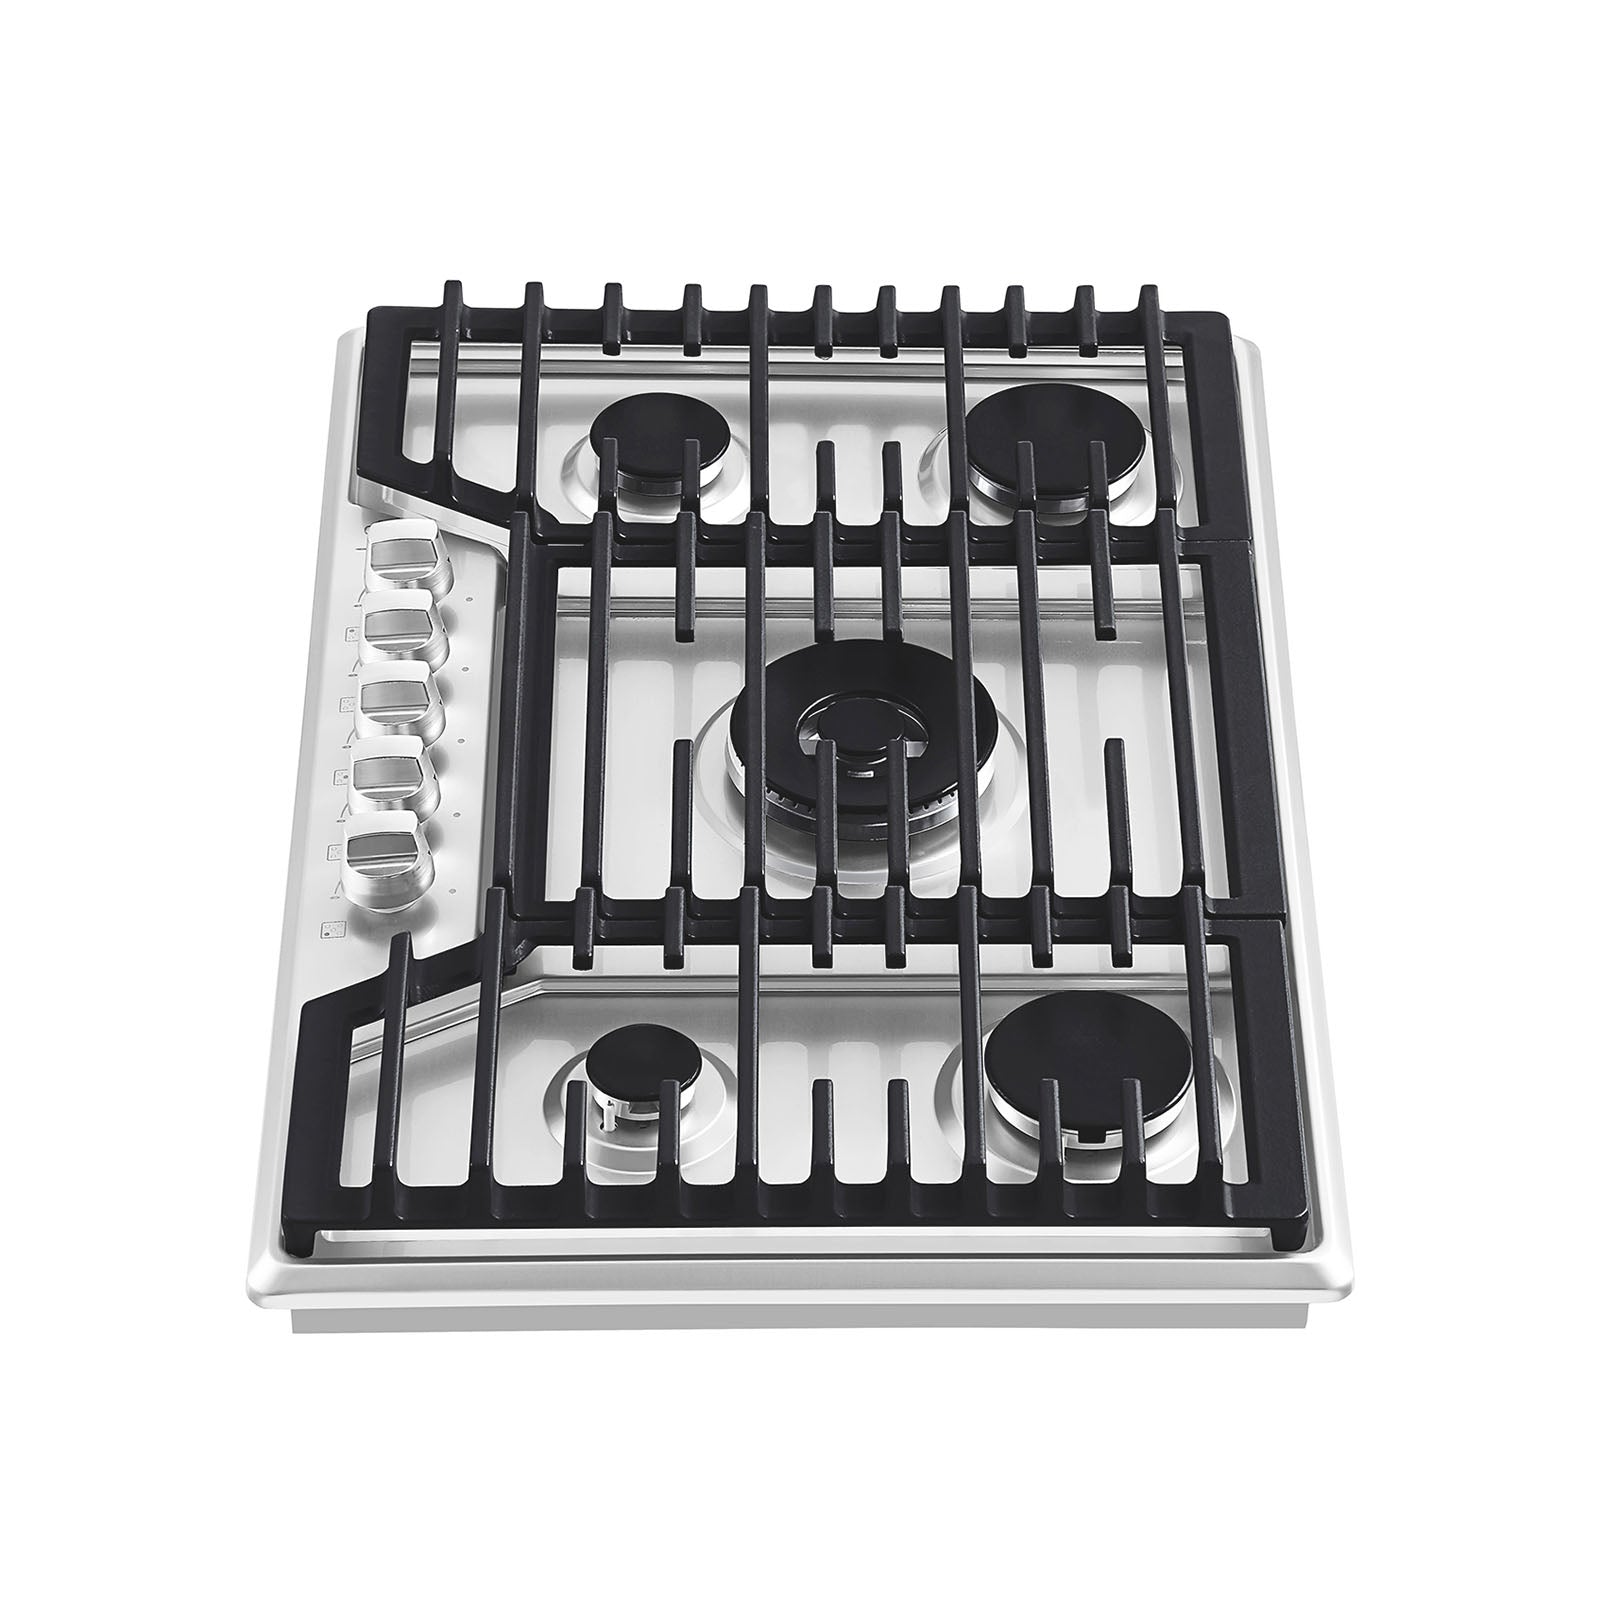 Empava 36 In. Built-in Gas Stove Cooktop